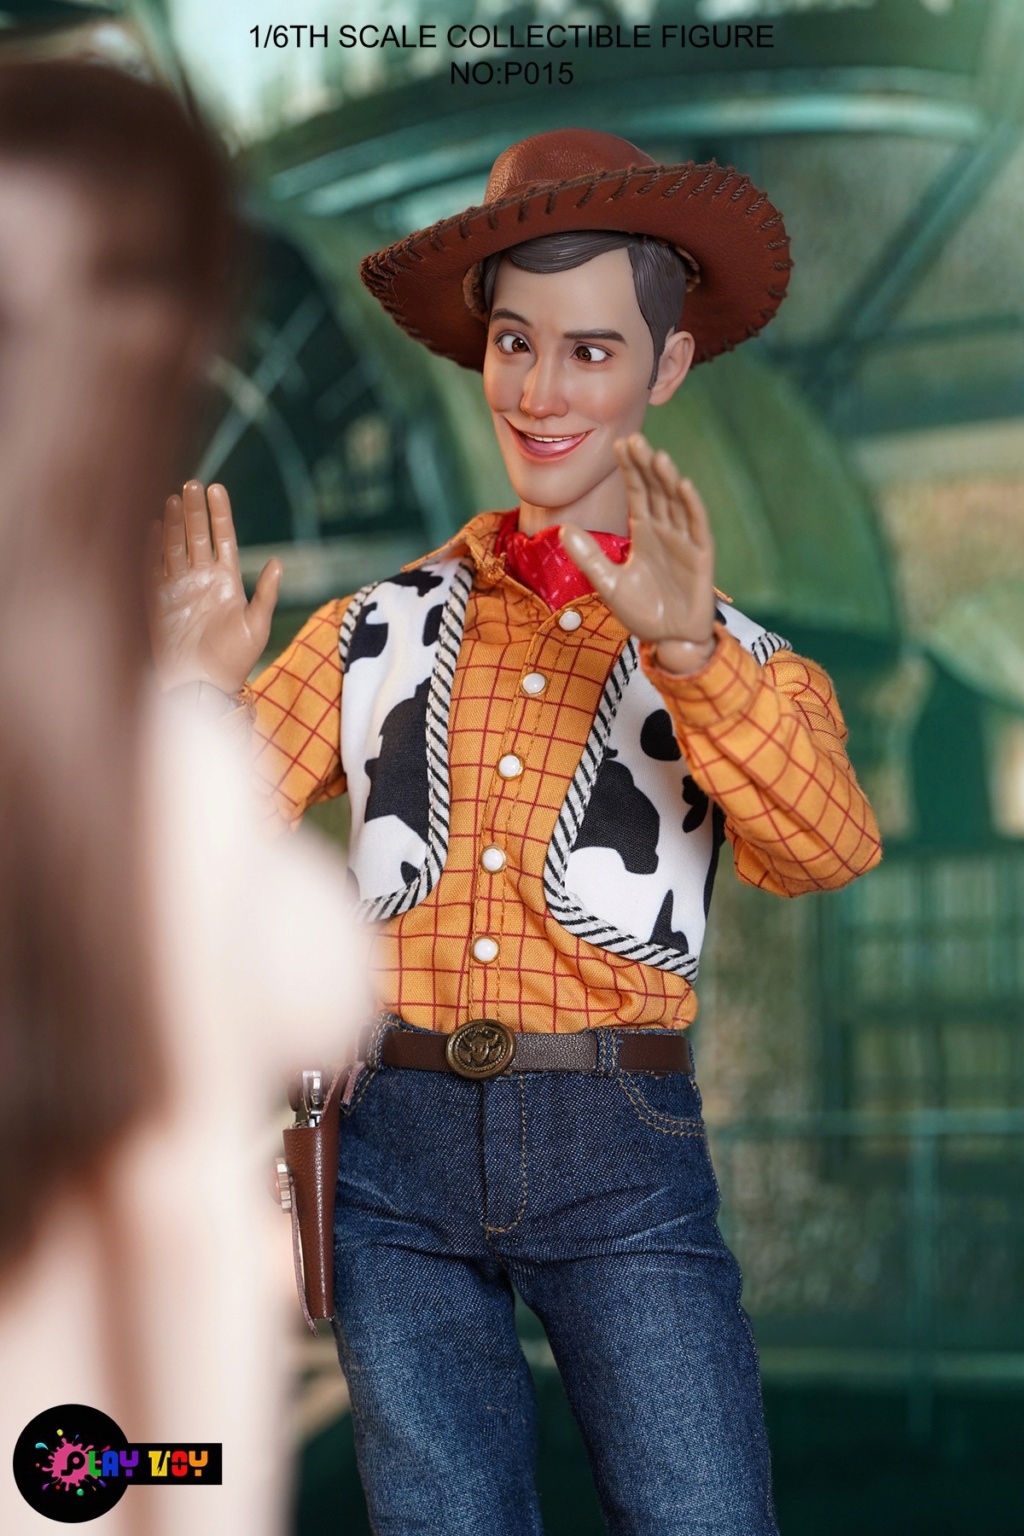 Cartoon-based - NEW PRODUCT: Play Toy: 1/6 Happy Cowboy Action Figure (NO:P015) 16145910